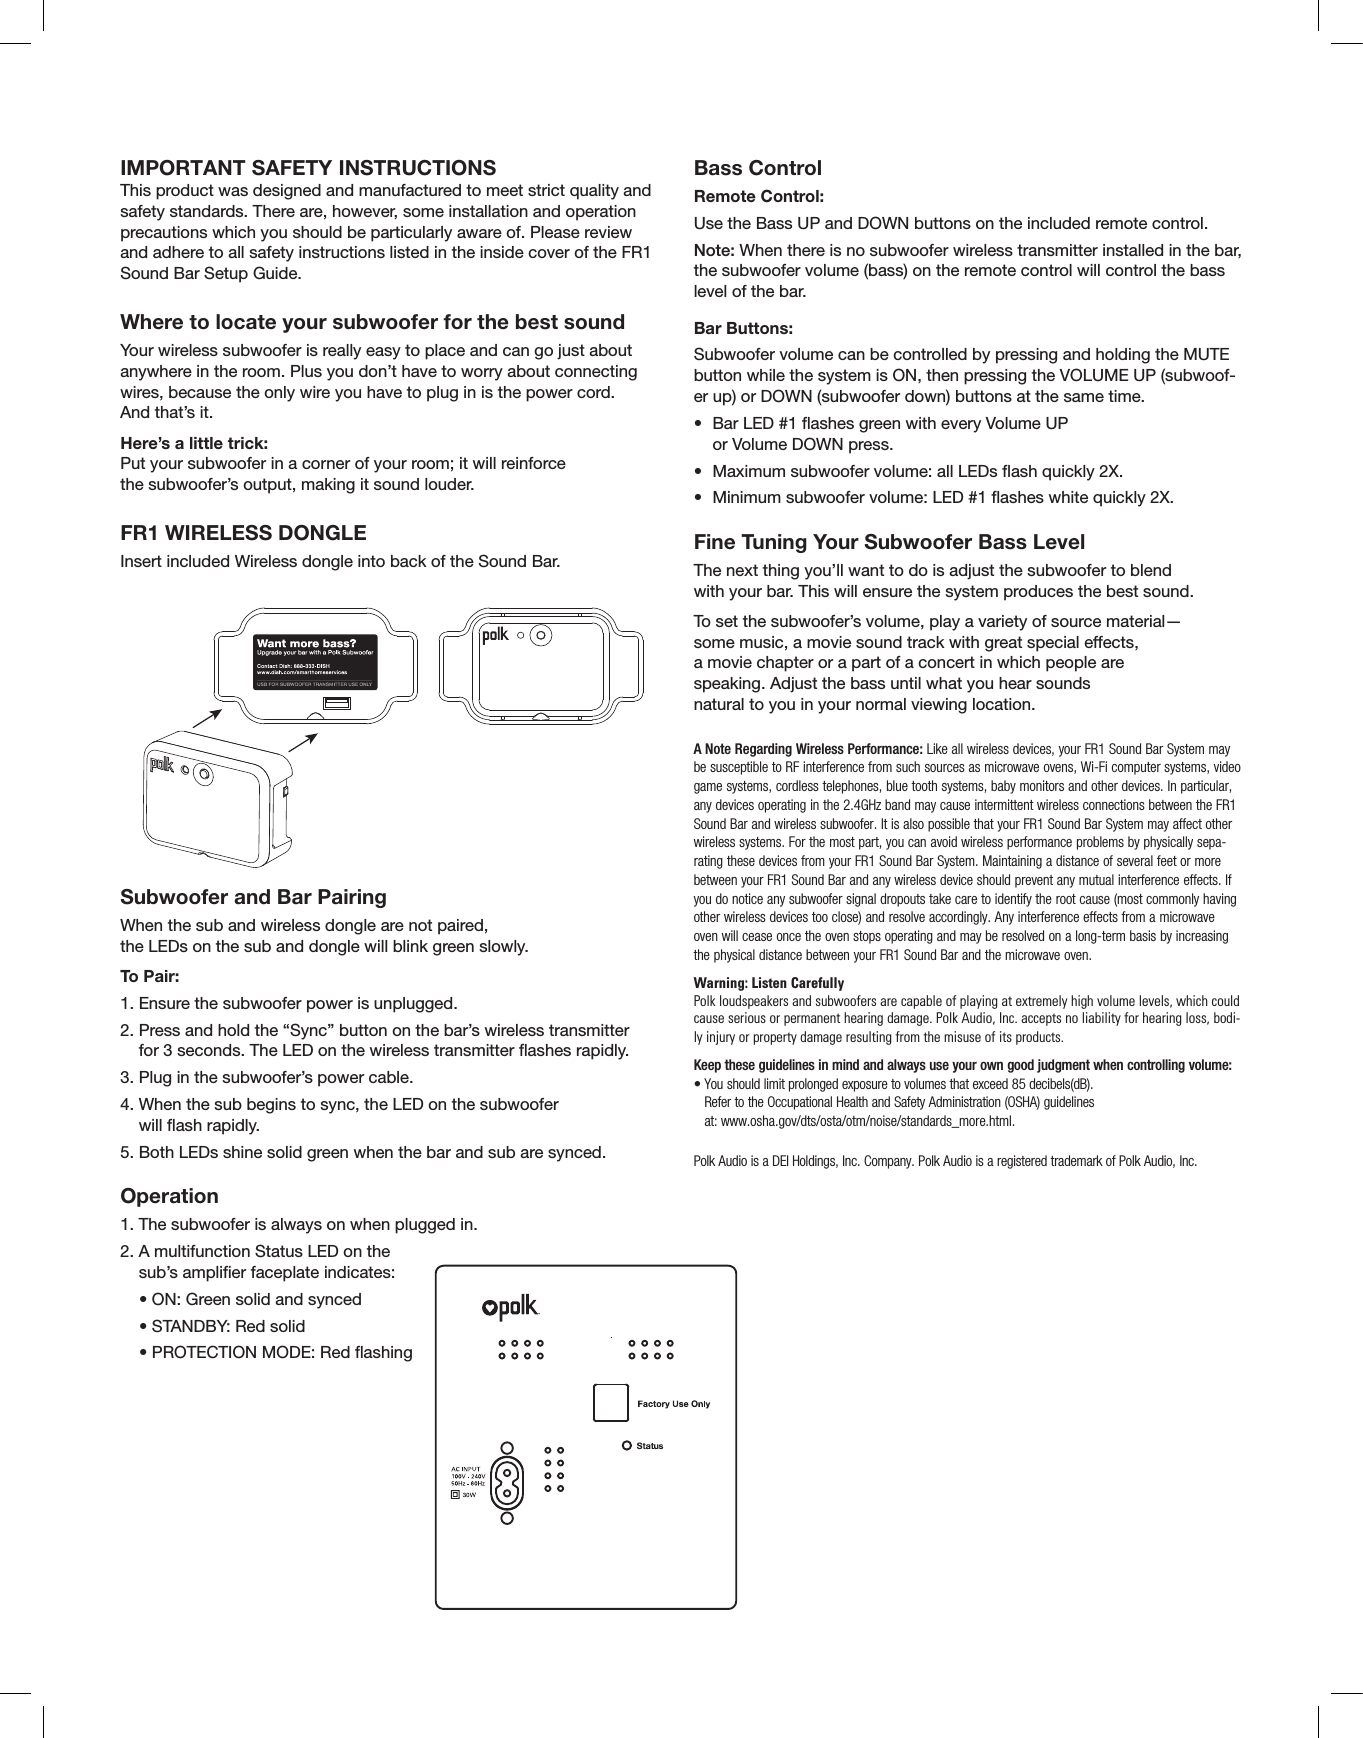 IMPORTANT SAFETY INSTRUCTIONSThis product was designed and manufactured to meet strict quality and safety standards. There are, however, some installation and operation precautions which you should be particularly aware of. Please review and adhere to all safety instructions listed in the inside cover of the FR1 Sound Bar Setup Guide.Where to locate your subwoofer for the best soundYour wireless subwoofer is really easy to place and can go just about anywhere in the room. Plus you don’t have to worry about connecting wires, because the only wire you have to plug in is the power cord.  And that’s it.Here’s a little trick:  Put your subwoofer in a corner of your room; it will reinforce  the subwoofer’s output, making it sound louder.FR1 WIRELESS DONGLE Insert included Wireless dongle into back of the Sound Bar.Subwoofer and Bar PairingWhen the sub and wireless dongle are not paired,  the LEDs on the sub and dongle will blink green slowly. To Pair:1. Ensure the subwoofer power is unplugged.2.  Press and hold the “Sync” button on the bar’s wireless transmitter  for 3 seconds. The LED on the wireless transmitter ashes rapidly. 3.  Plug in the subwoofer’s power cable.4.  When the sub begins to sync, the LED on the subwoofer  will ash rapidly.5.  Both LEDs shine solid green when the bar and sub are synced. Operation1. The subwoofer is always on when plugged in.2.   A multifunction Status LED on the sub’s amplier faceplate indicates:  • ON: Green solid and synced  • STANDBY: Red solid  • PROTECTION MODE: Red ashingBass Control Remote Control:Use the Bass UP and DOWN buttons on the included remote control.Note: When there is no subwoofer wireless transmitter installed in the bar, the subwoofer volume (bass) on the remote control will control the bass level of the bar.Bar Buttons:Subwoofer volume can be controlled by pressing and holding the MUTE button while the system is ON, then pressing the VOLUME UP (subwoof-er up) or DOWN (subwoofer down) buttons at the same time. •   Bar LED #1 ashes green with every Volume UP  or Volume DOWN press. •  Maximum subwoofer volume: all LEDs ash quickly 2X.•  Minimum subwoofer volume: LED #1 ashes white quickly 2X.Fine Tuning Your Subwoofer Bass LevelThe next thing you’ll want to do is adjust the subwoofer to blend  with your bar. This will ensure the system produces the best sound.To set the subwoofer’s volume, play a variety of source material—some music, a movie sound track with great special effects,a movie chapter or a part of a concert in which people arespeaking. Adjust the bass until what you hear soundsnatural to you in your normal viewing location.A Note Regarding Wireless Performance: Like all wireless devices, your FR1 Sound Bar System may be susceptible to RF interference from such sources as microwave ovens, Wi-Fi computer systems, video game systems, cordless telephones, blue tooth systems, baby monitors and other devices. In particular, any devices operating in the 2.4GHz band may cause intermittent wireless connections between the FR1 Sound Bar and wireless subwoofer. It is also possible that your FR1 Sound Bar System may affect other wireless systems. For the most part, you can avoid wireless performance problems by physically sepa-rating these devices from your FR1 Sound Bar System. Maintaining a distance of several feet or more between your FR1 Sound Bar and any wireless device should prevent any mutual interference effects. If you do notice any subwoofer signal dropouts take care to identify the root cause (most commonly having other wireless devices too close) and resolve accordingly. Any interference effects from a microwave oven will cease once the oven stops operating and may be resolved on a long-term basis by increasing the physical distance between your FR1 Sound Bar and the microwave oven. Warning: Listen Carefully Polk loudspeakers and subwoofers are capable of playing at extremely high volume levels, which could cause serious or permanent hearing damage. Polk Audio, Inc. accepts no liability for hearing loss, bodi-ly injury or property damage resulting from the misuse of its products.Keep these guidelines in mind and always use your own good judgment when controlling volume: •  You should limit prolonged exposure to volumes that exceed 85 decibels(dB).  Refer to the Occupational Health and Safety Administration (OSHA) guidelines  at: www.osha.gov/dts/osta/otm/noise/standards_more.html.Polk Audio is a DEI Holdings, Inc. Company. Polk Audio is a registered trademark of Polk Audio, Inc. 